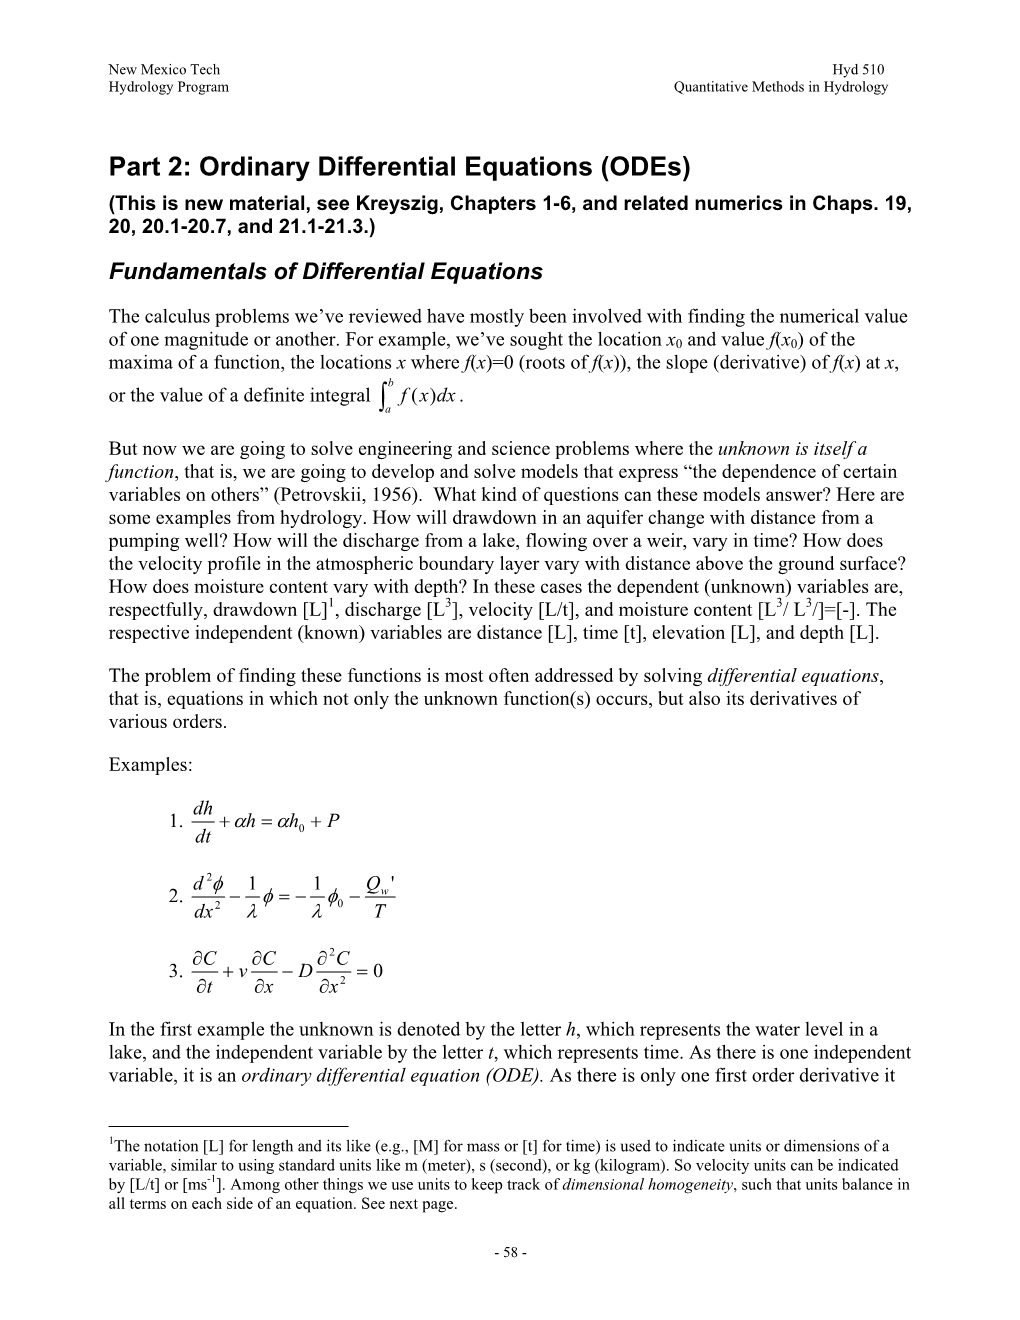 Part 2: Ordinary Differential Equations (Odes) (This Is New Material, See Kreyszig, Chapters 1-6, and Related Numerics in Chaps